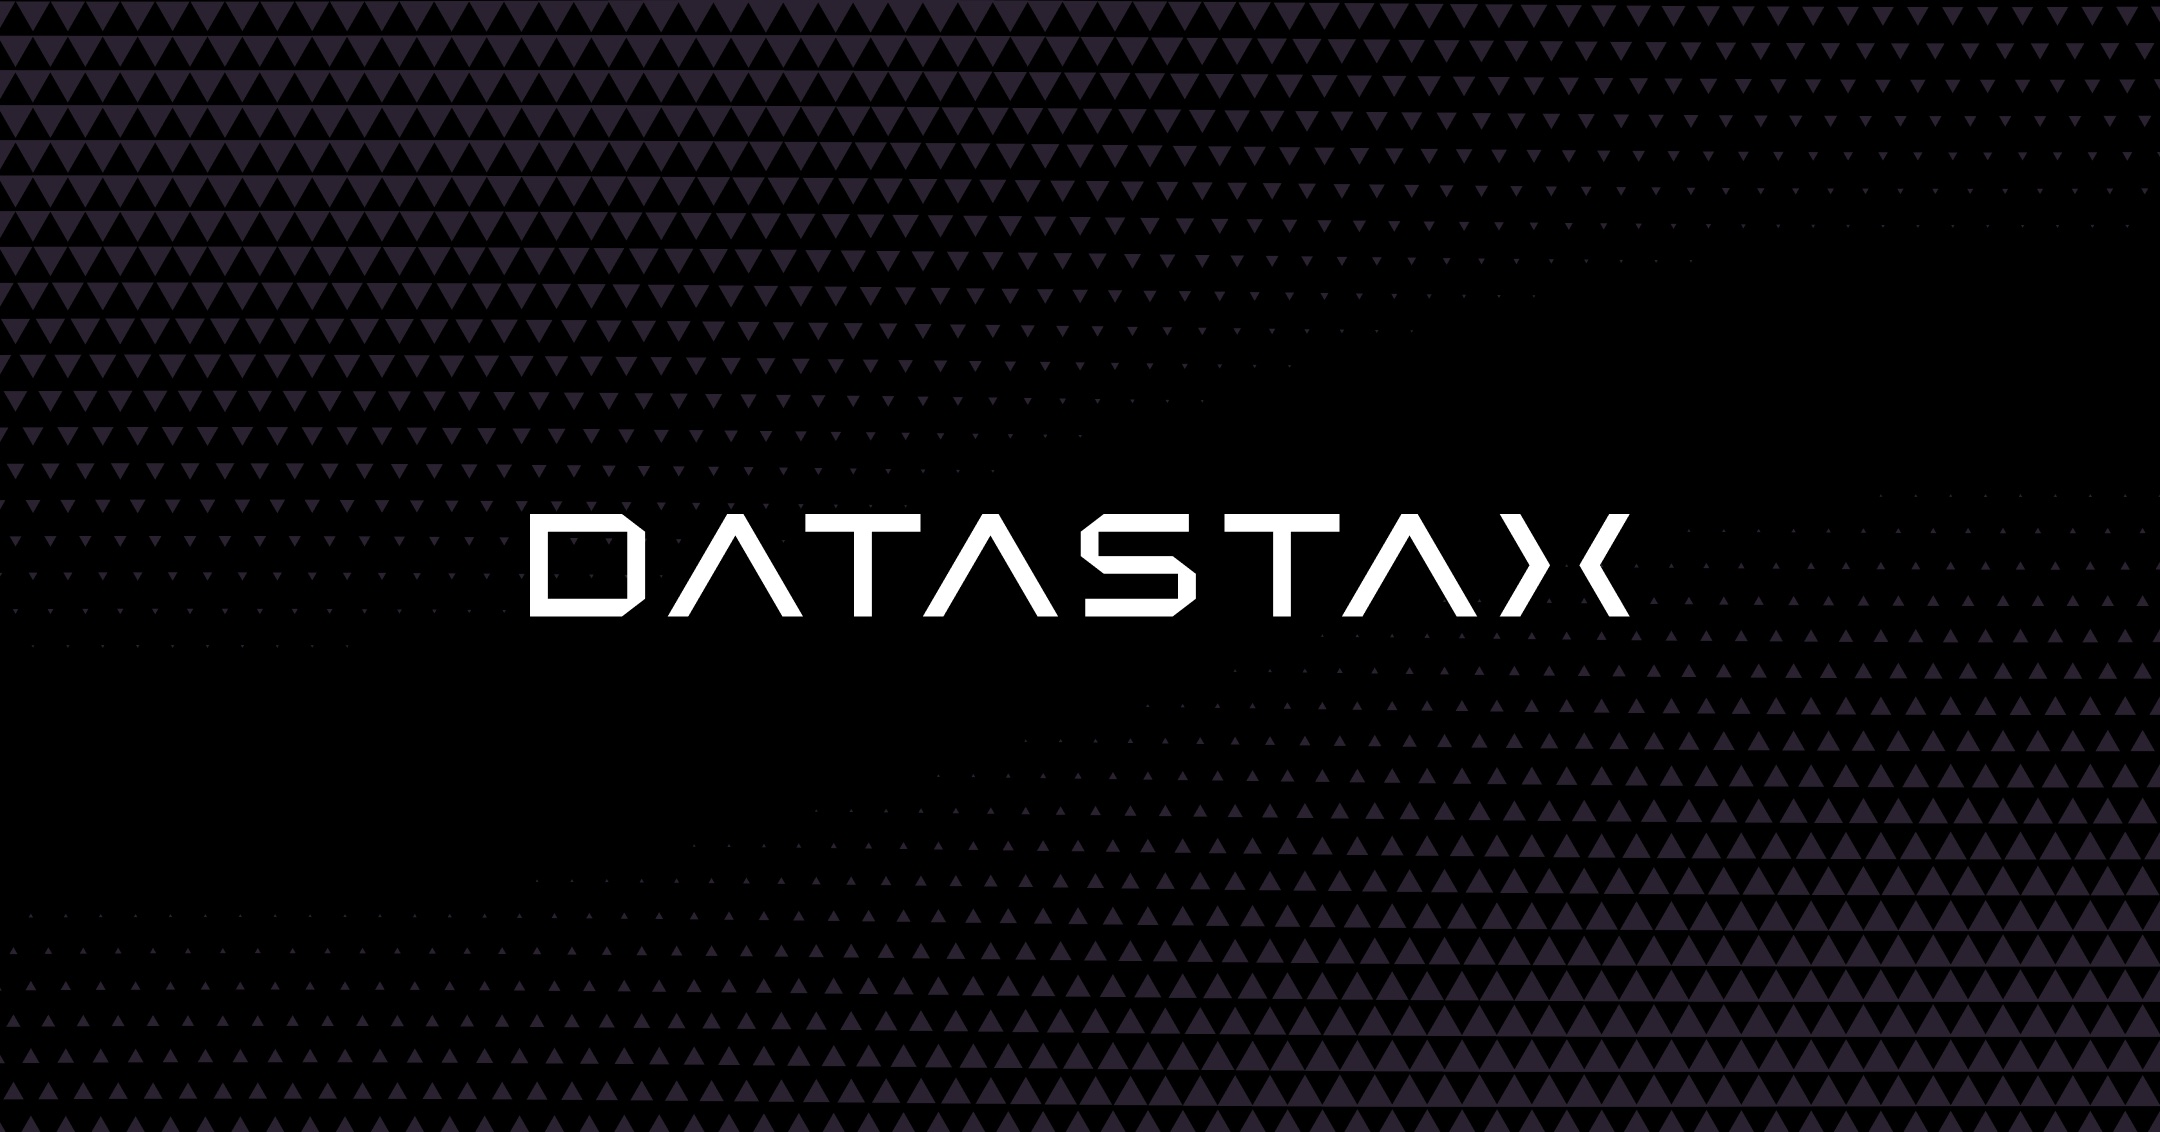 Circle Scales Up Digital Parenting Services with DataStax Astra DB